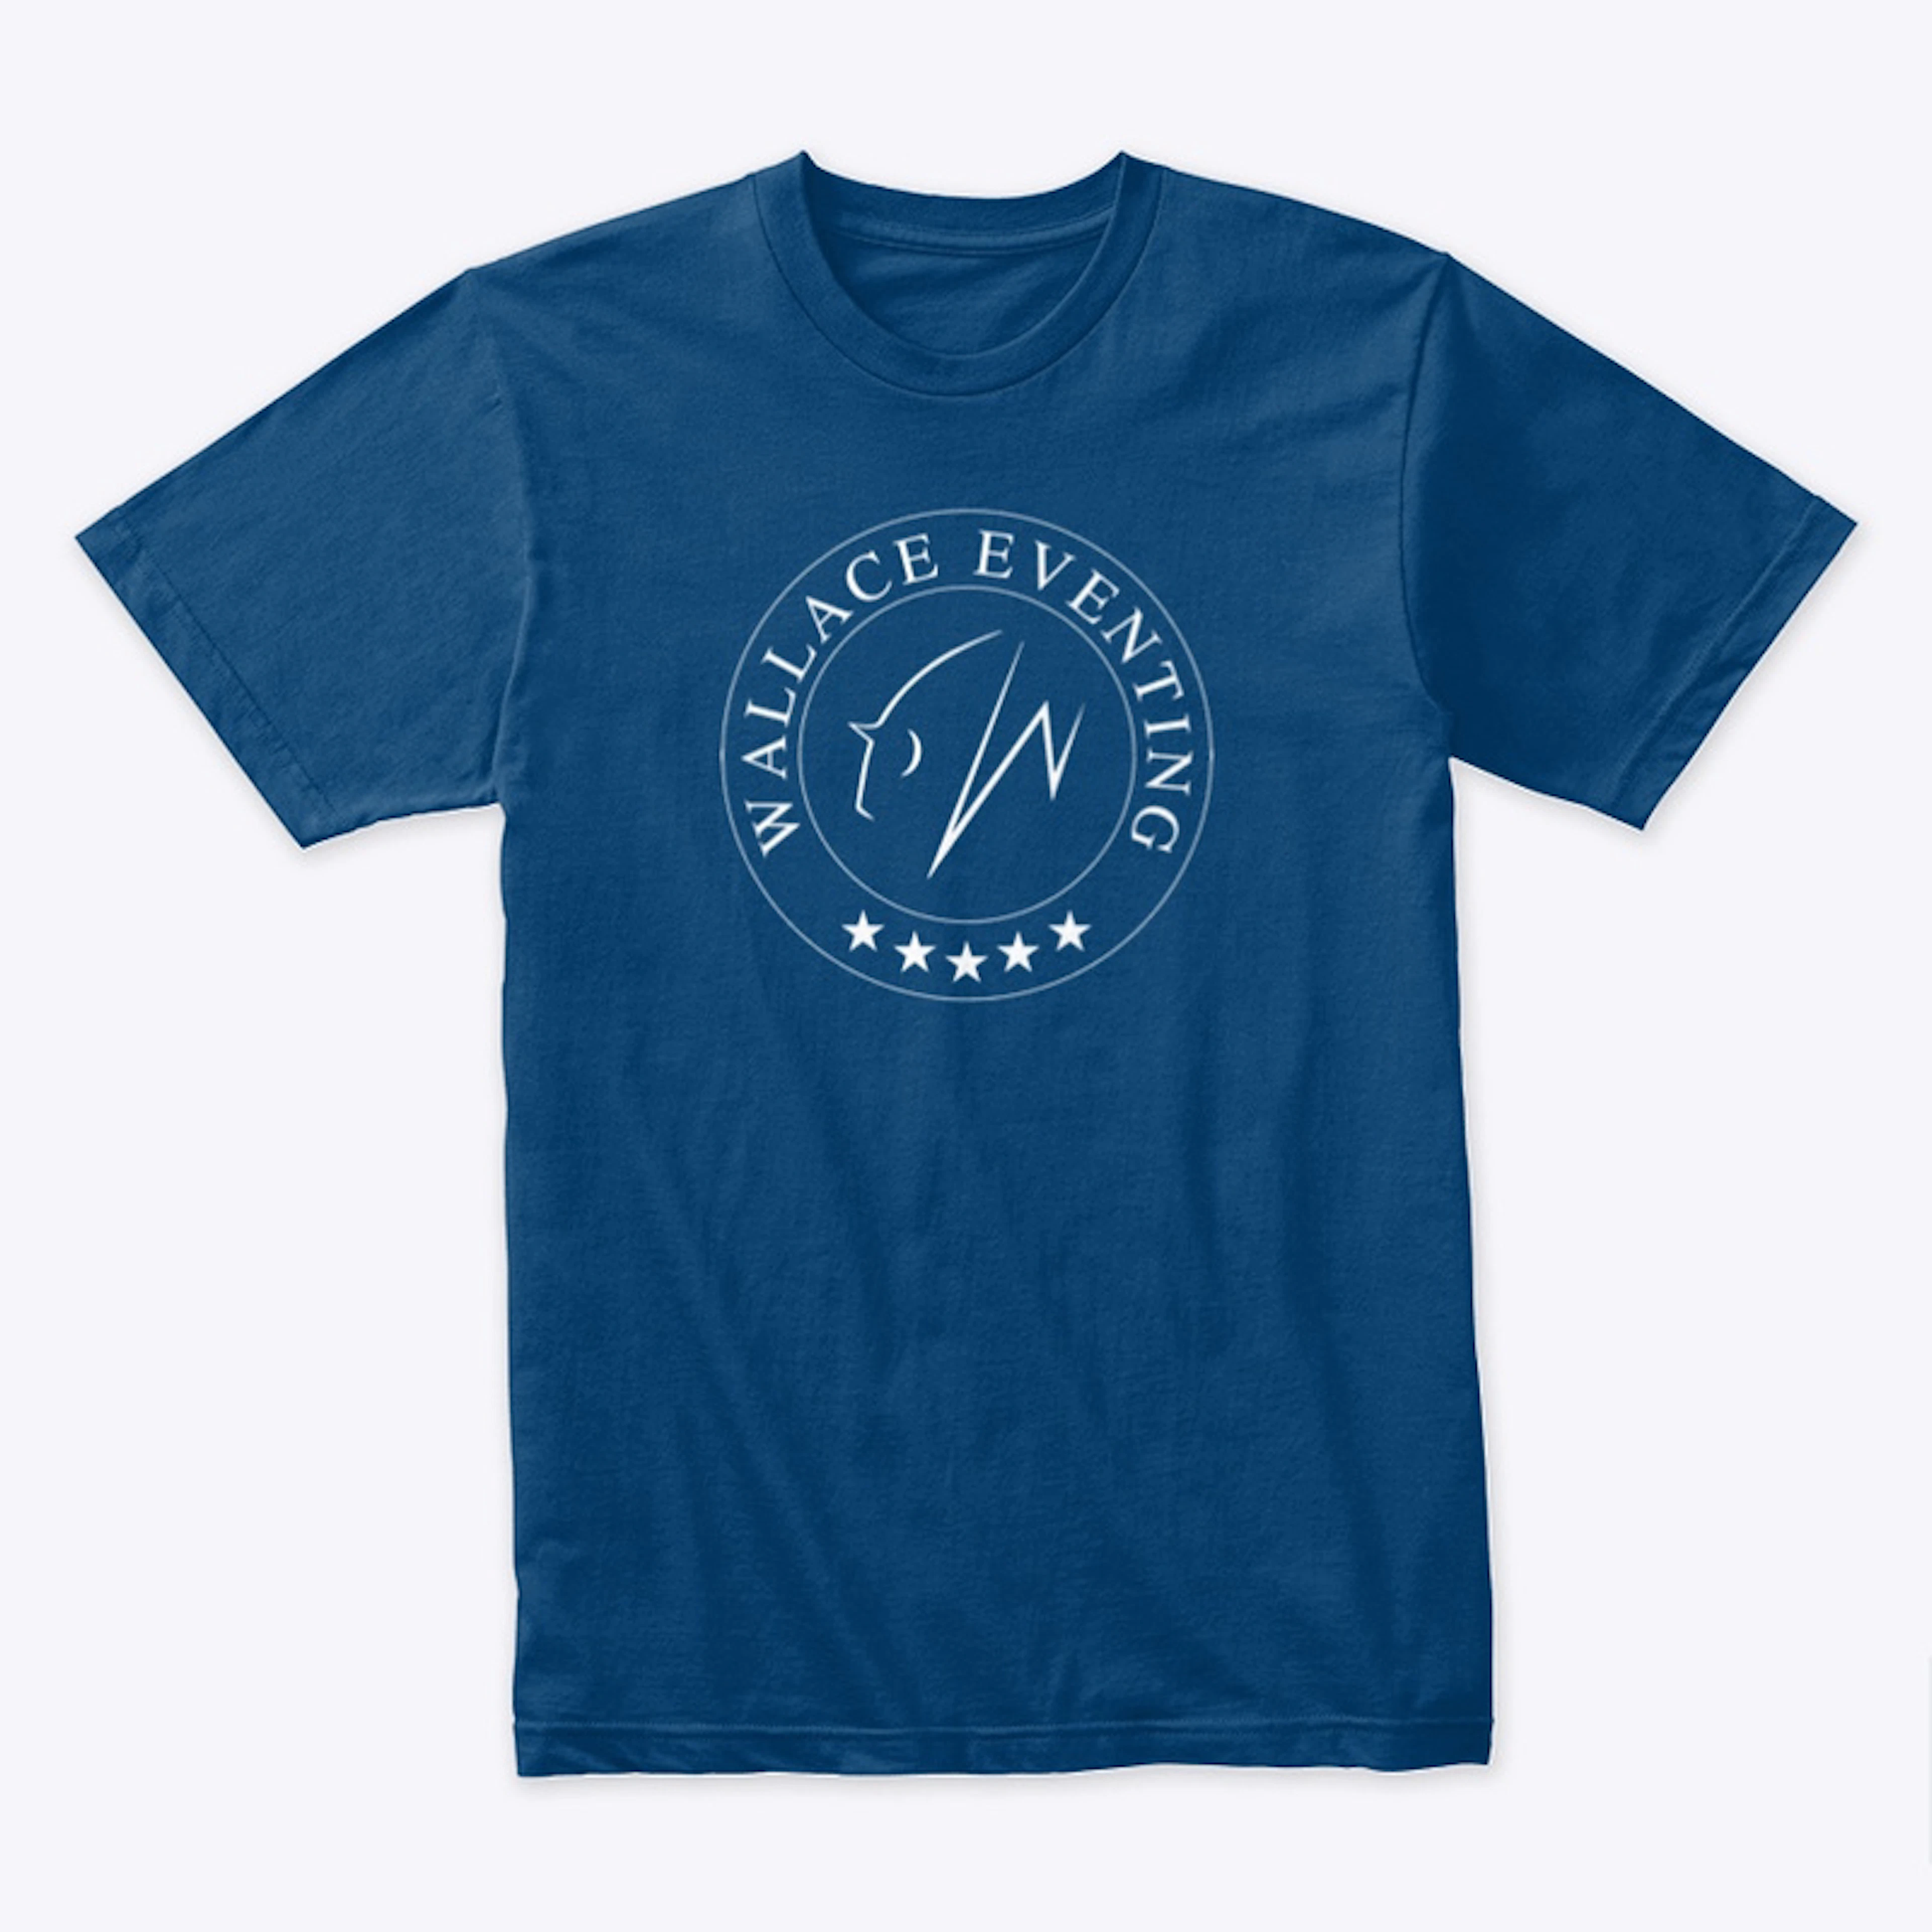 Wallace Eventing Premium T-Shirt